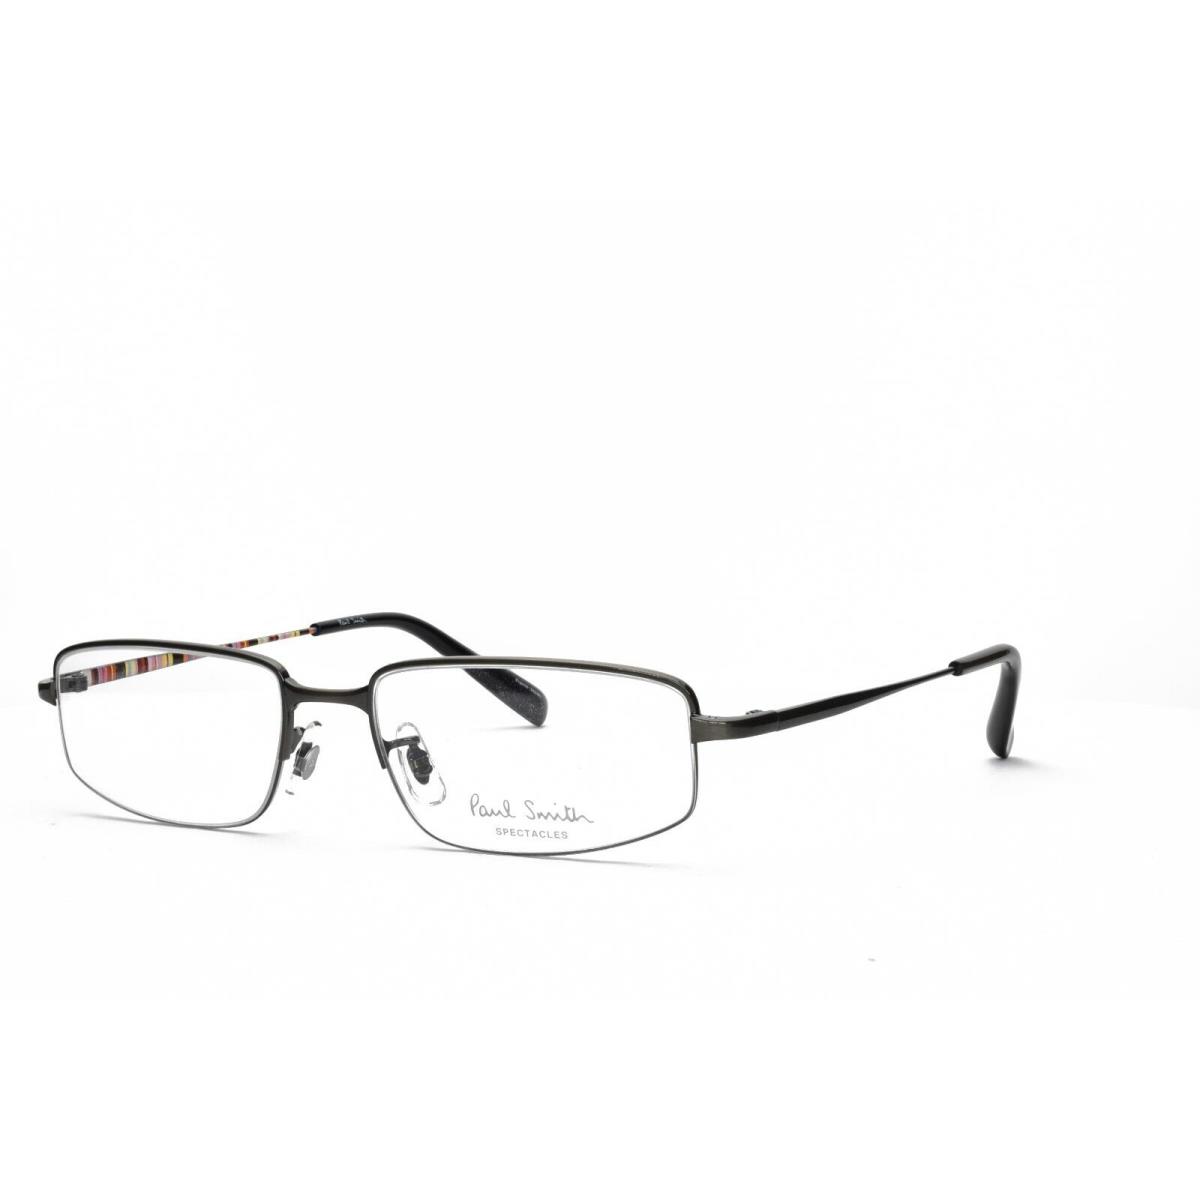 Paul Smith PS 1005 A Eyeglasses Frames Only 51-17-140